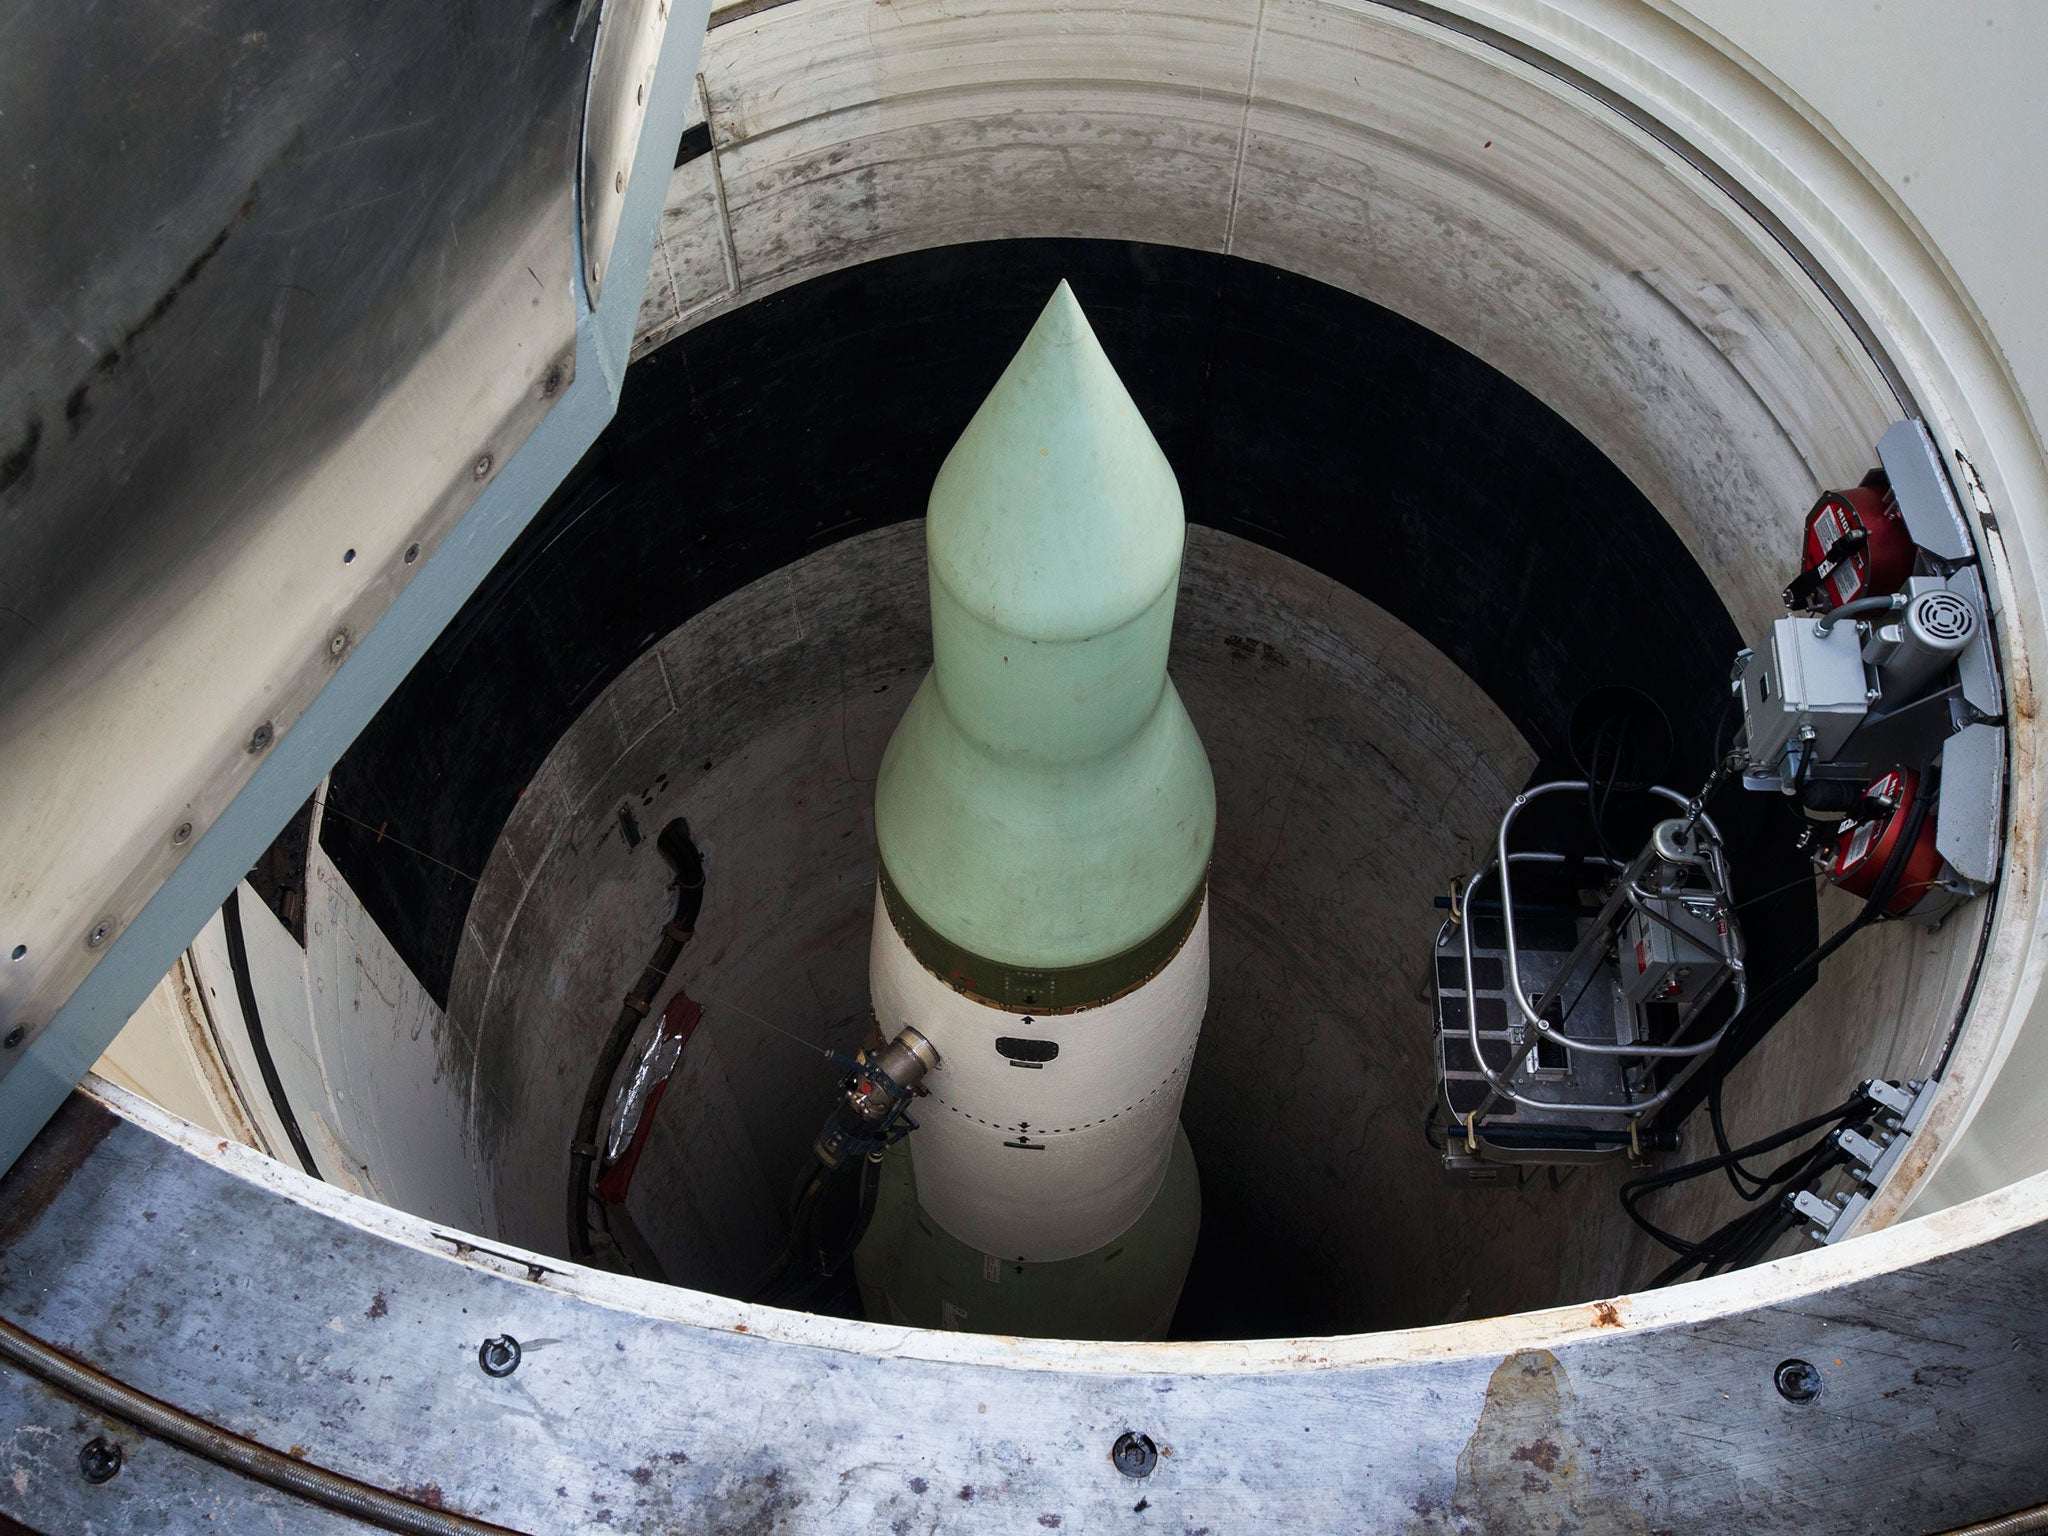 An unarmed Minutemen intercontinental ballistic missile is seen in its launch tube at the Delta-09 launch facility just outside Wall, South Dakota